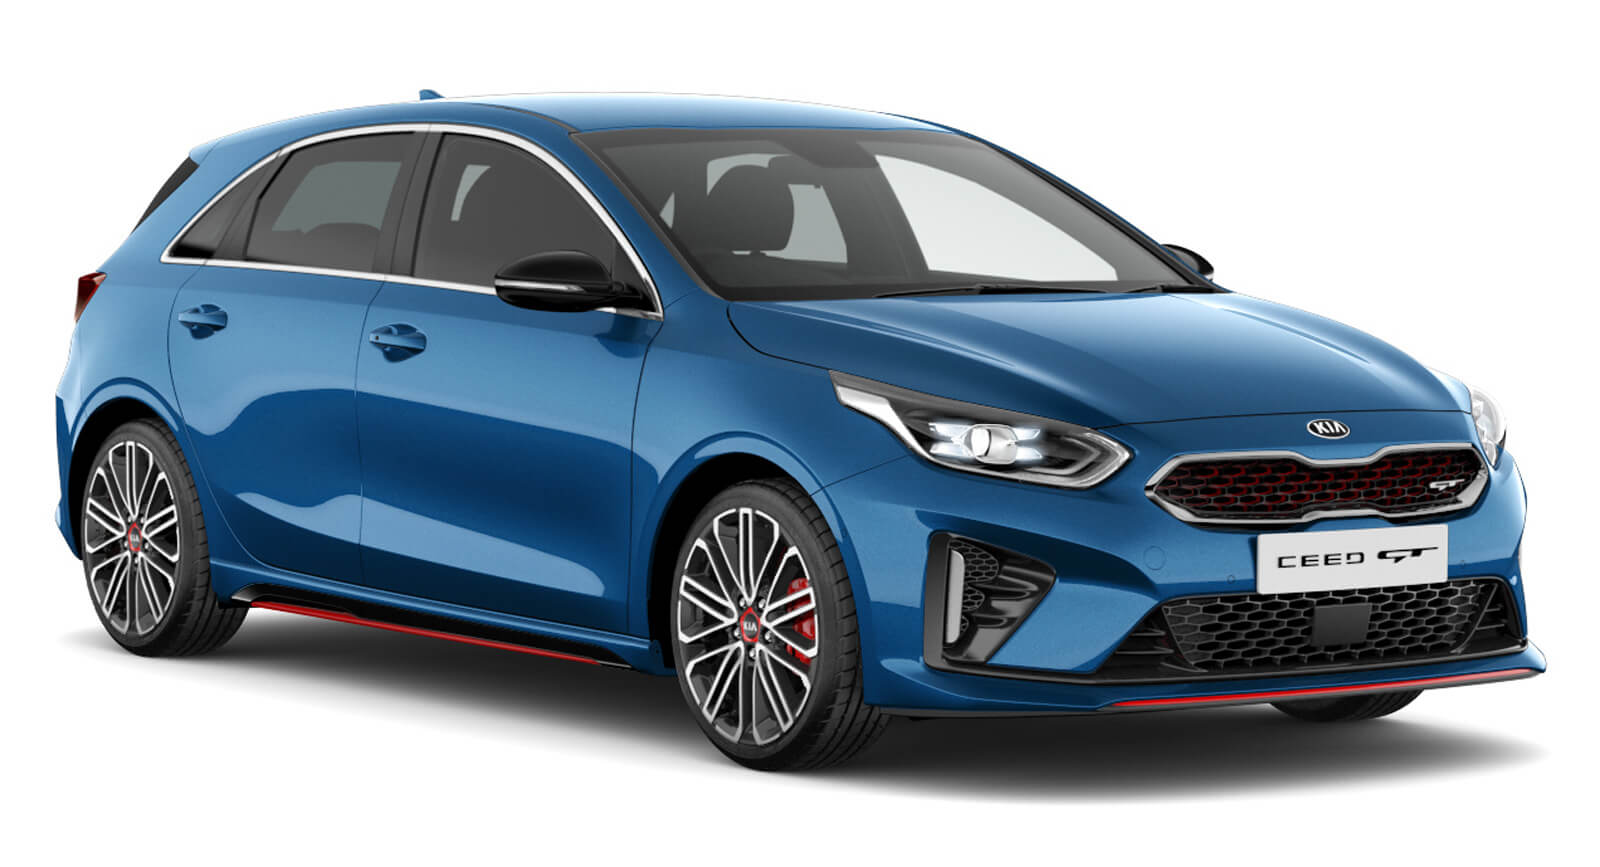 Kia Ceed Lineup Reshuffled And Upgraded For 2021, Gets New 156 HP